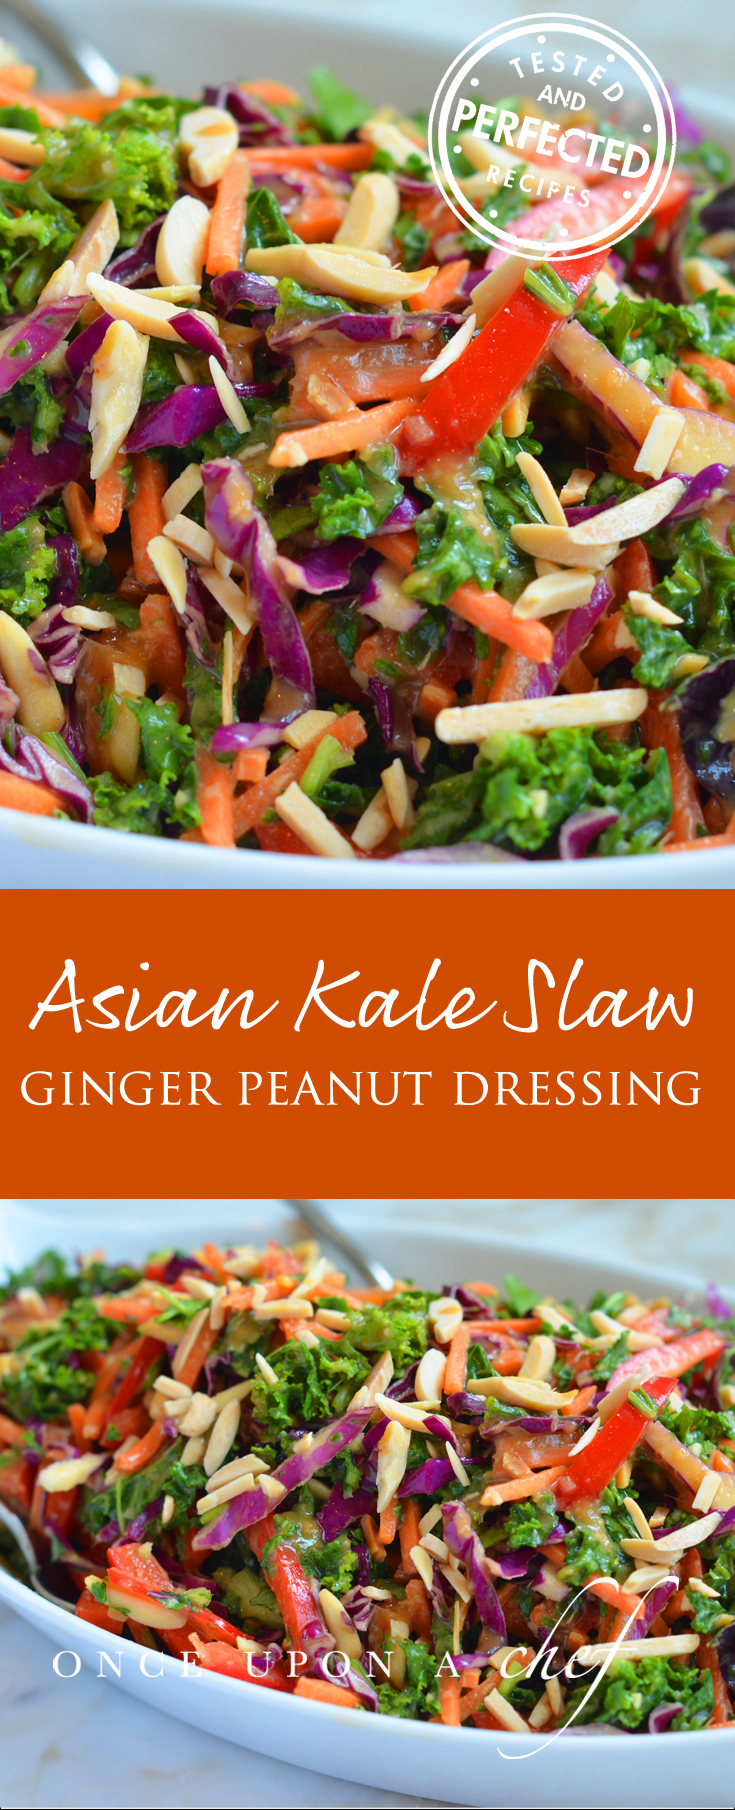 Asian Kale Salad with Ginger Peanut Dressing - Once Upon a Chef